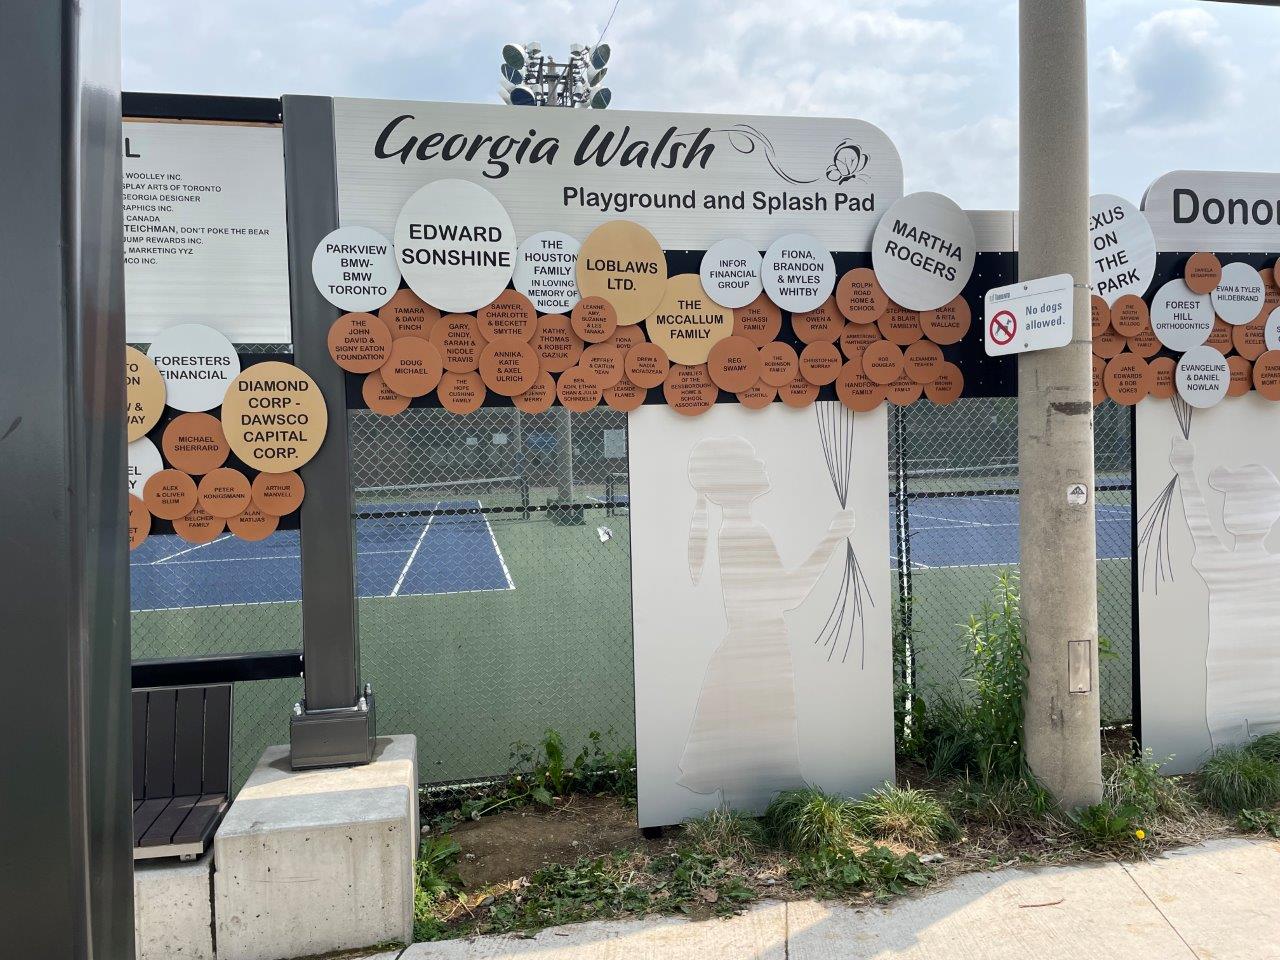 The Donor Wall shown along the exterior fence of the tennis courts showing circular balloon shapes in different sizes and colours with donor names on each balloon. Two silhouettes are shown holding a string connected to the various balloons above.